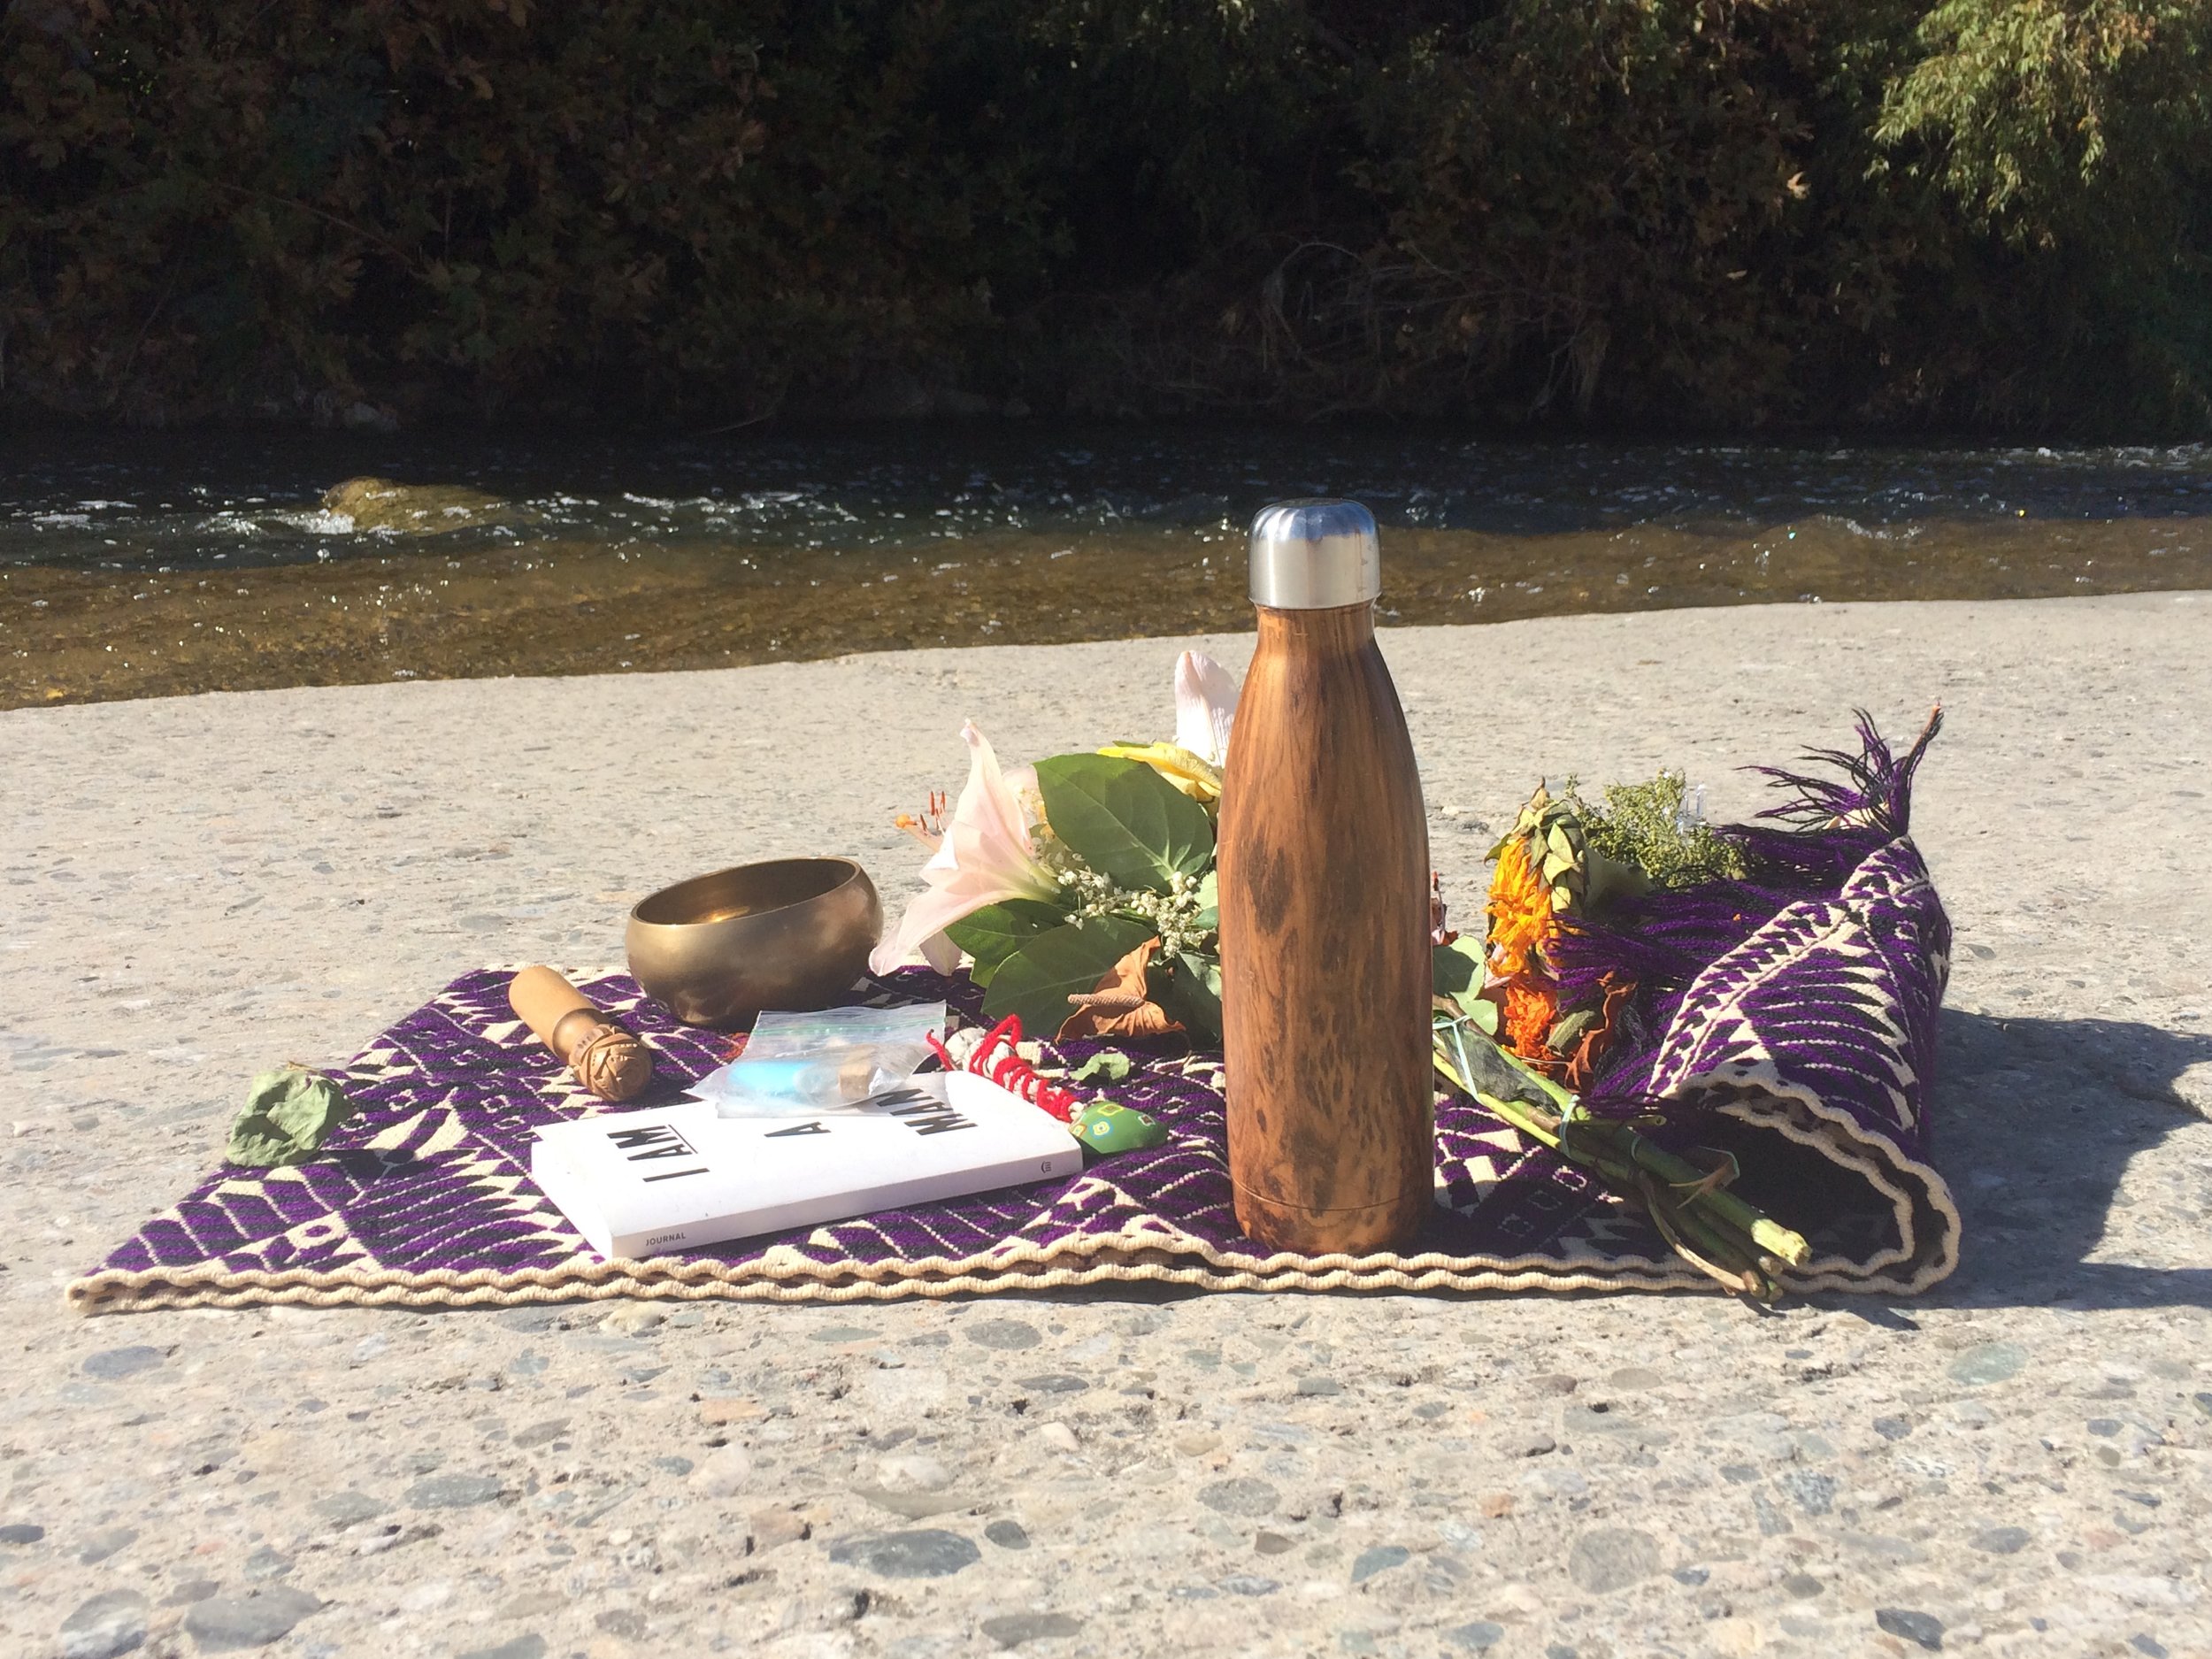   Our centerpiece with offerings of flowers to the river.  